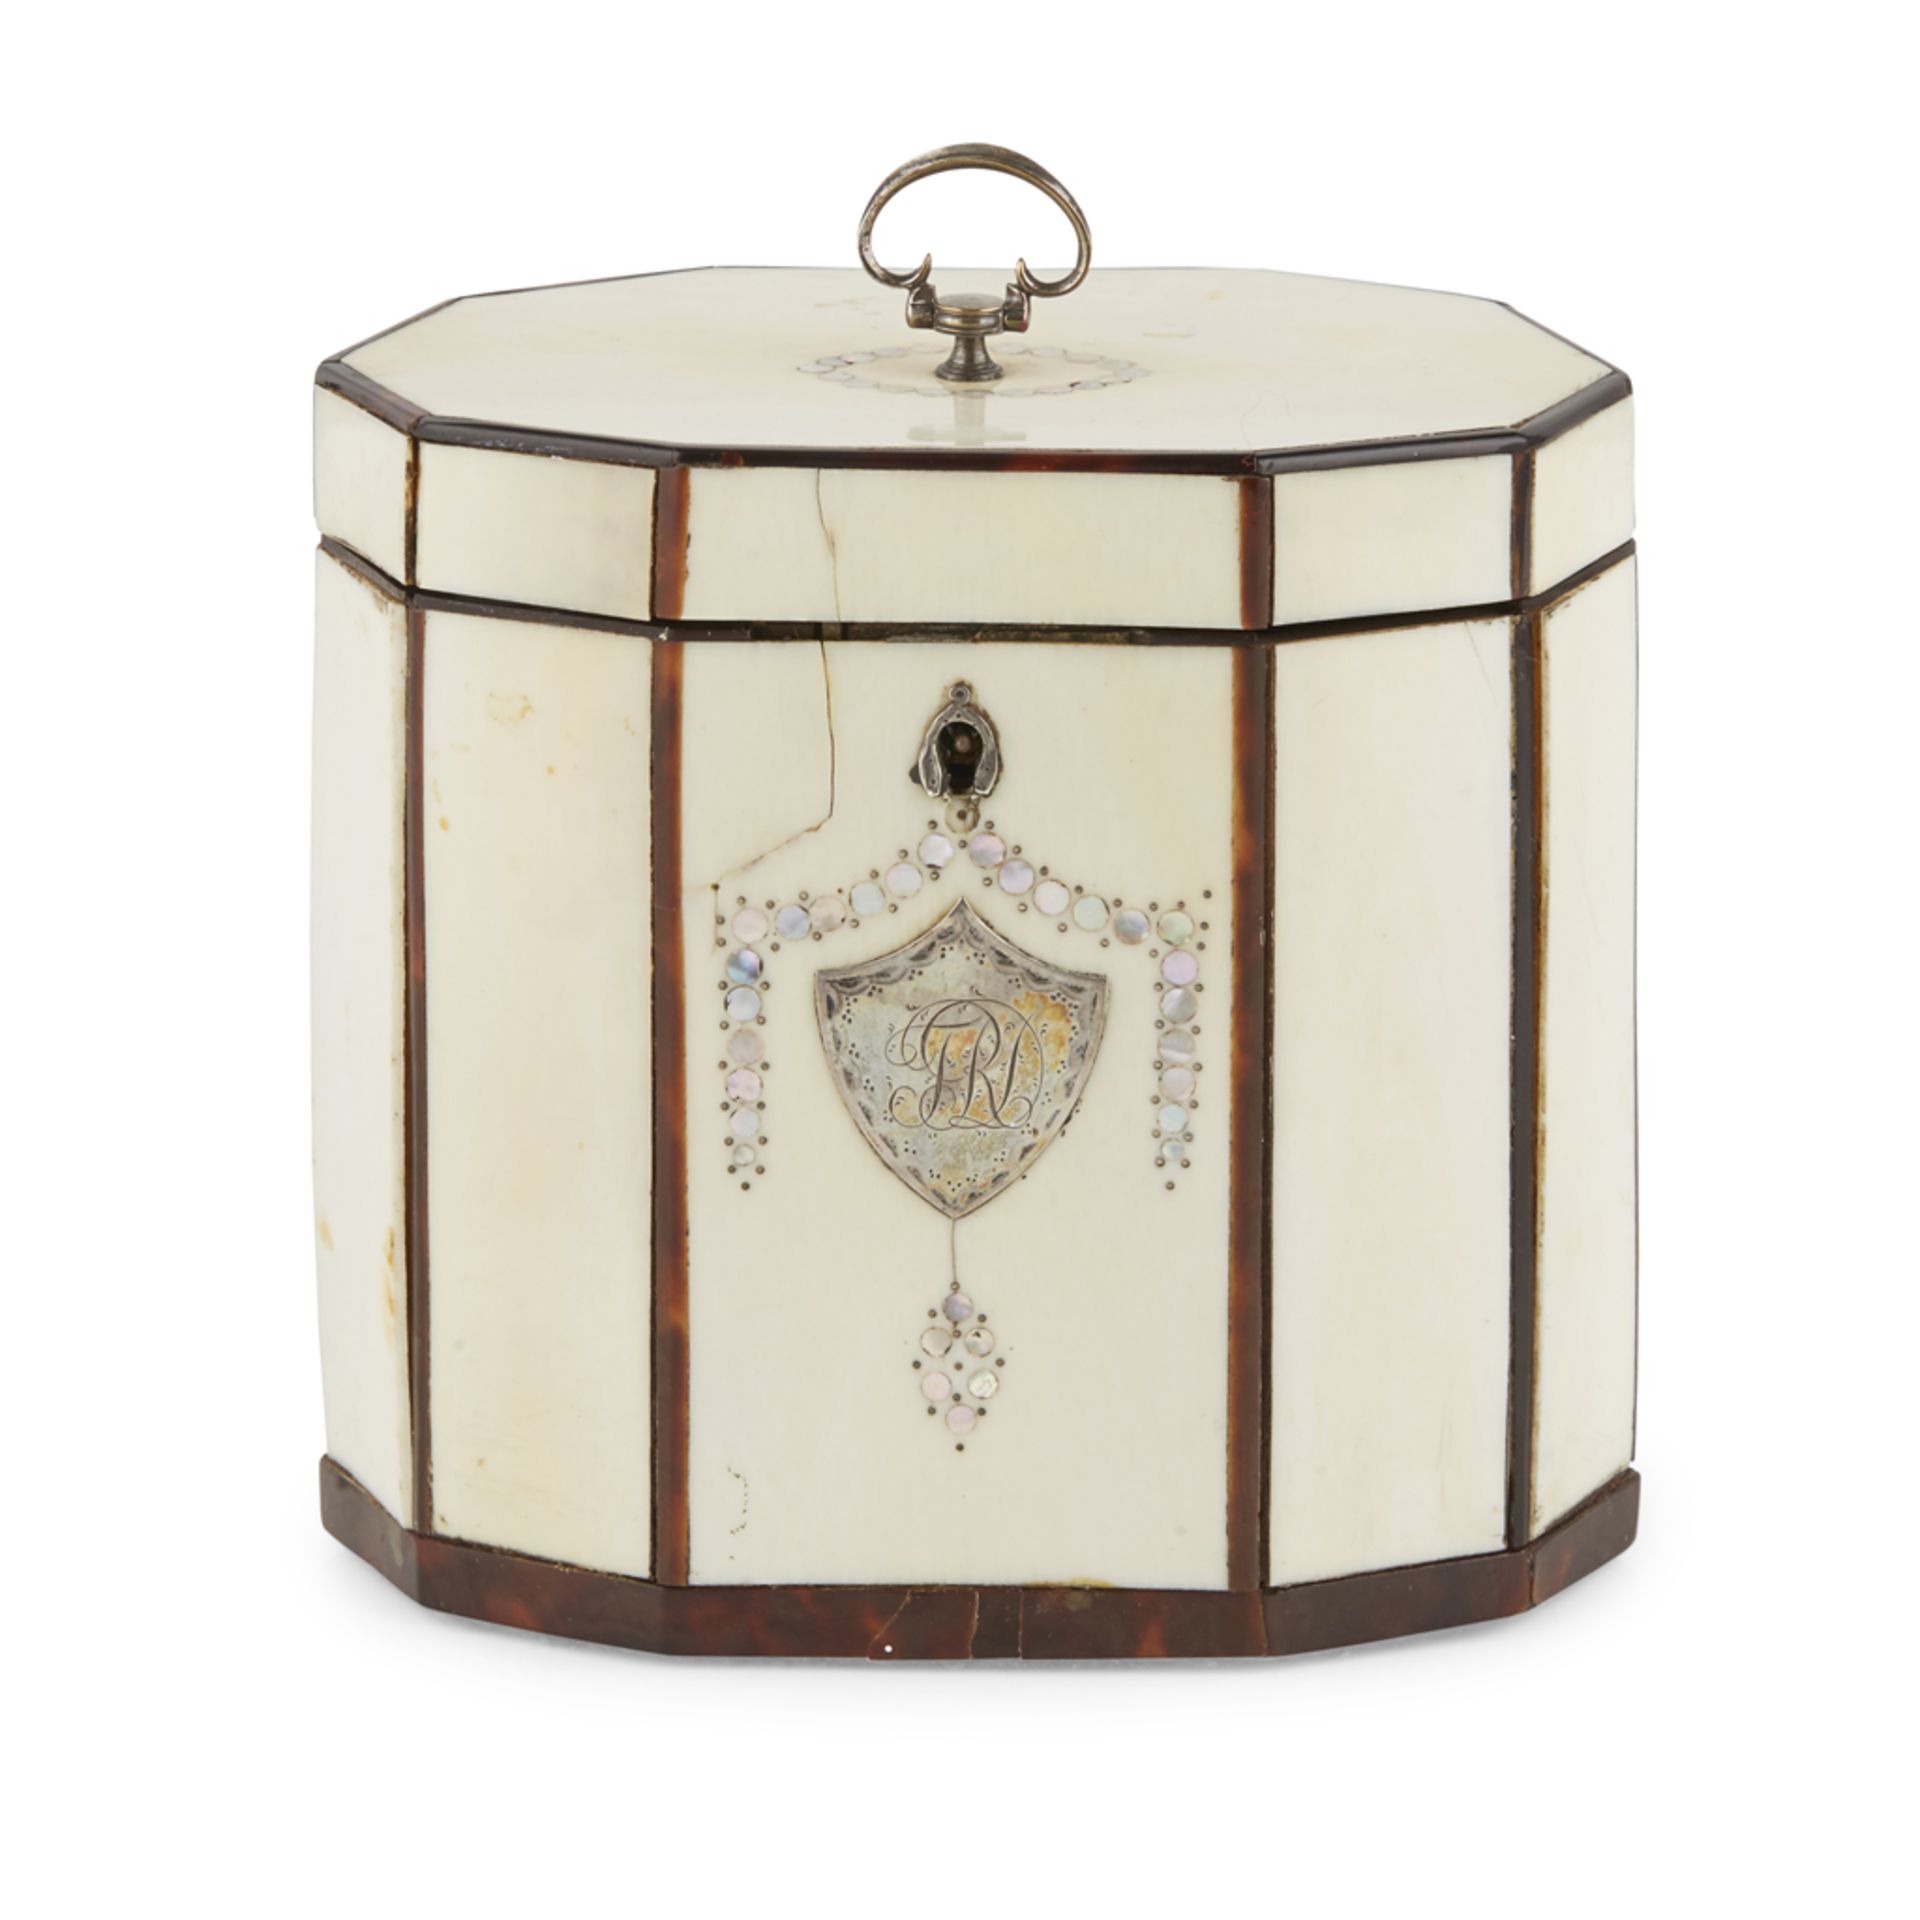 GEORGE III IVORY AND TORTOISESHELL-BANDED TEA CADDY LATE 18TH CENTURY of decahedron form with a loop